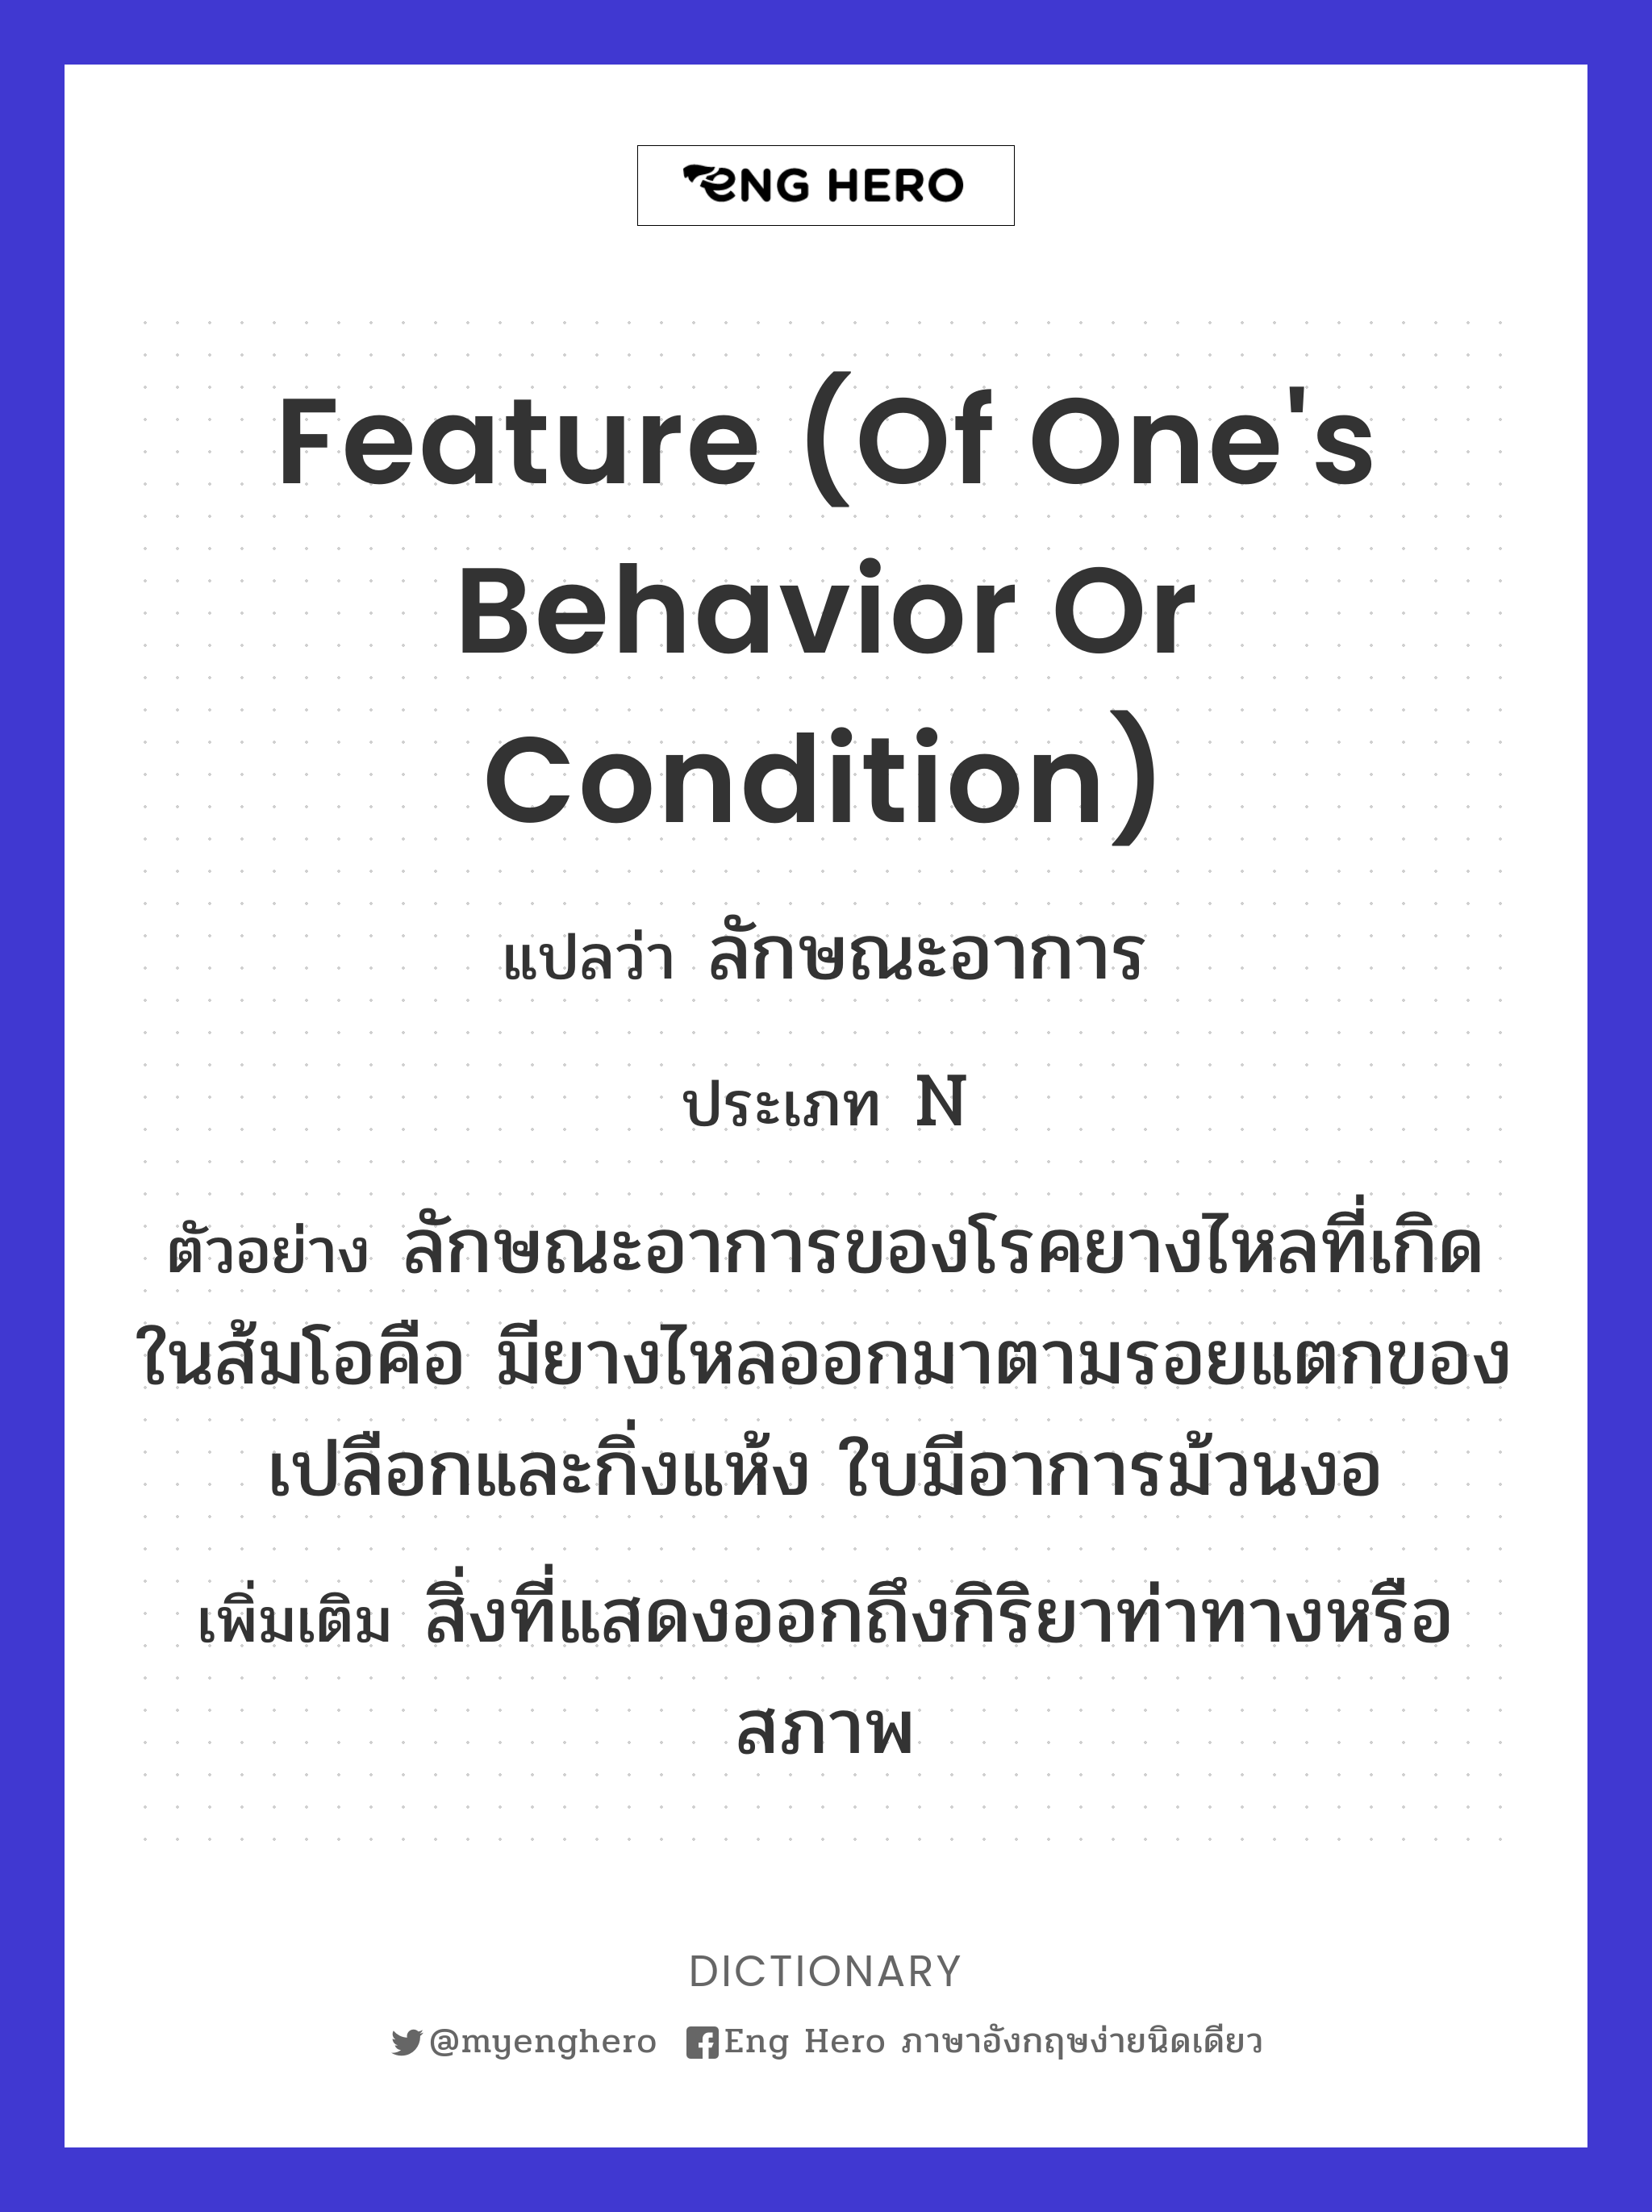 feature (of one's behavior or condition)